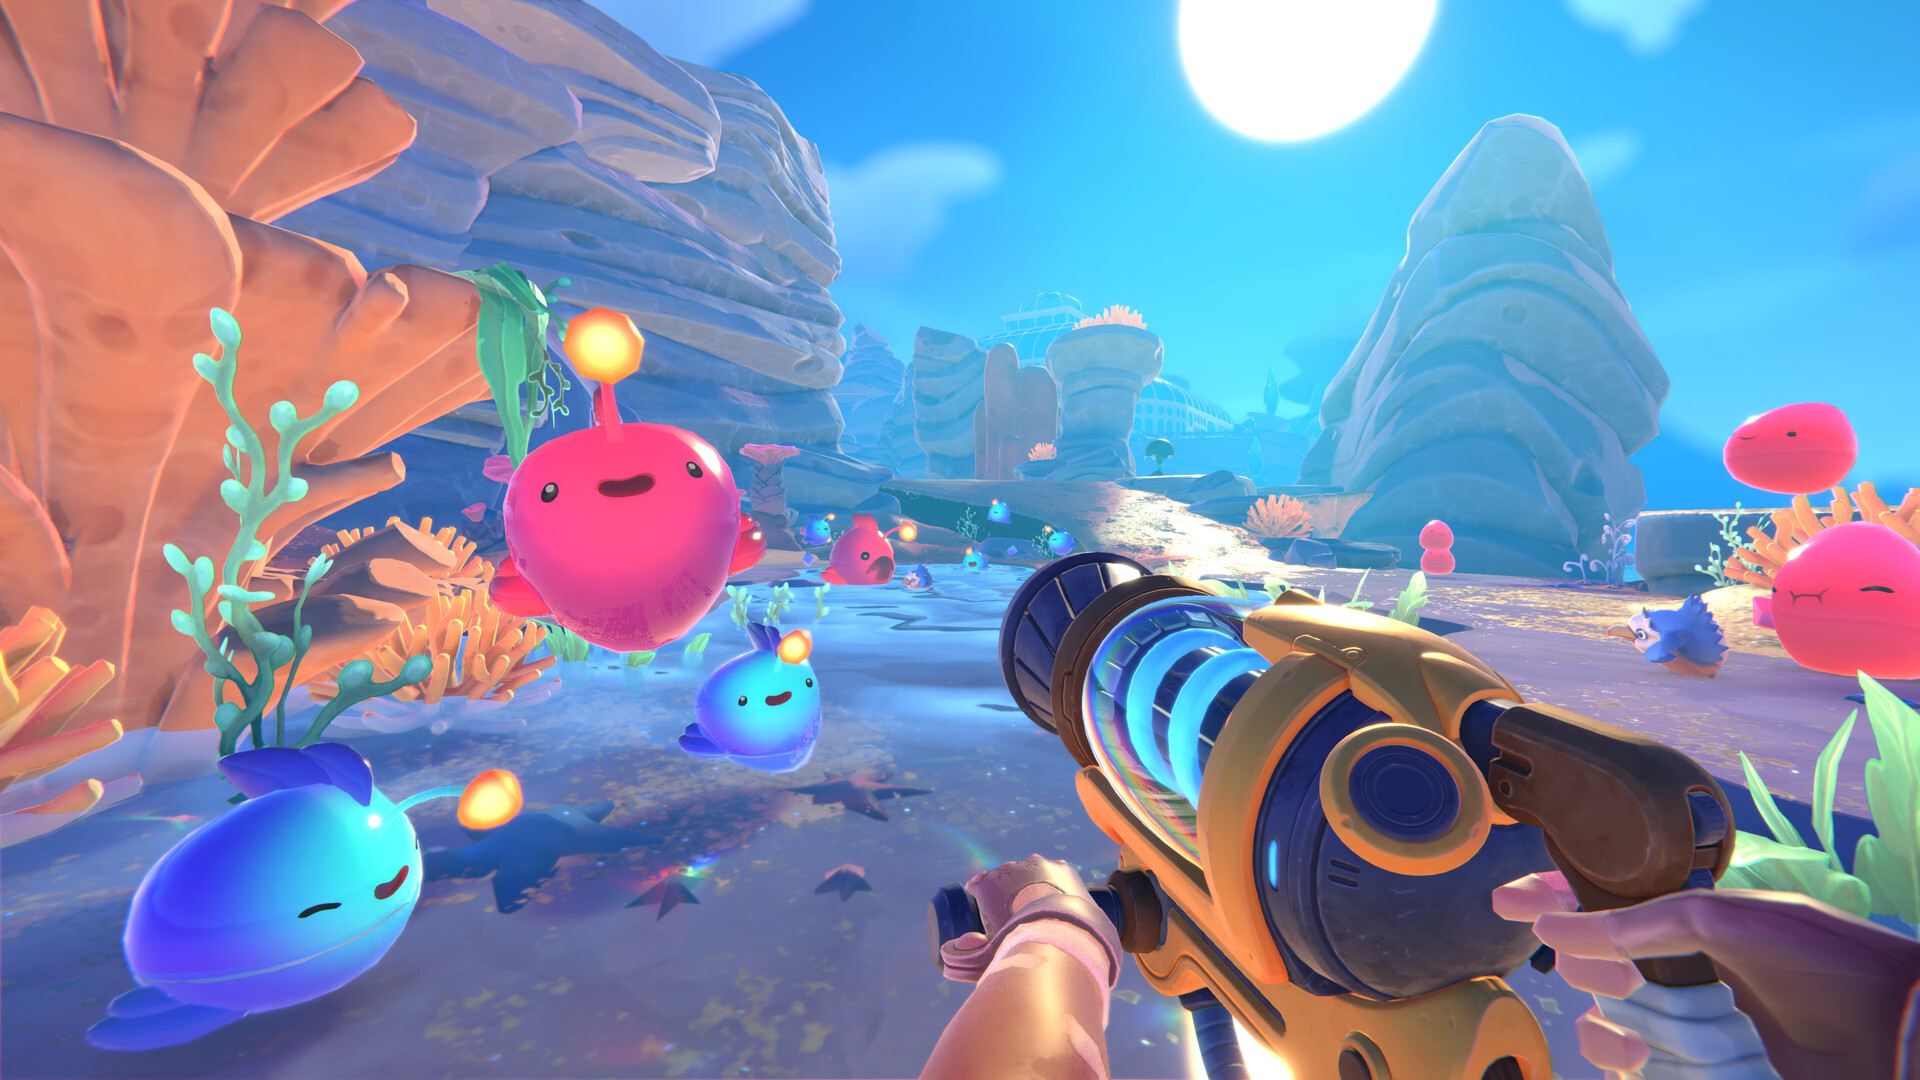 How Much Will Slime Rancher 2 Cost? - Slime Rancher 2 Price - Prima Games